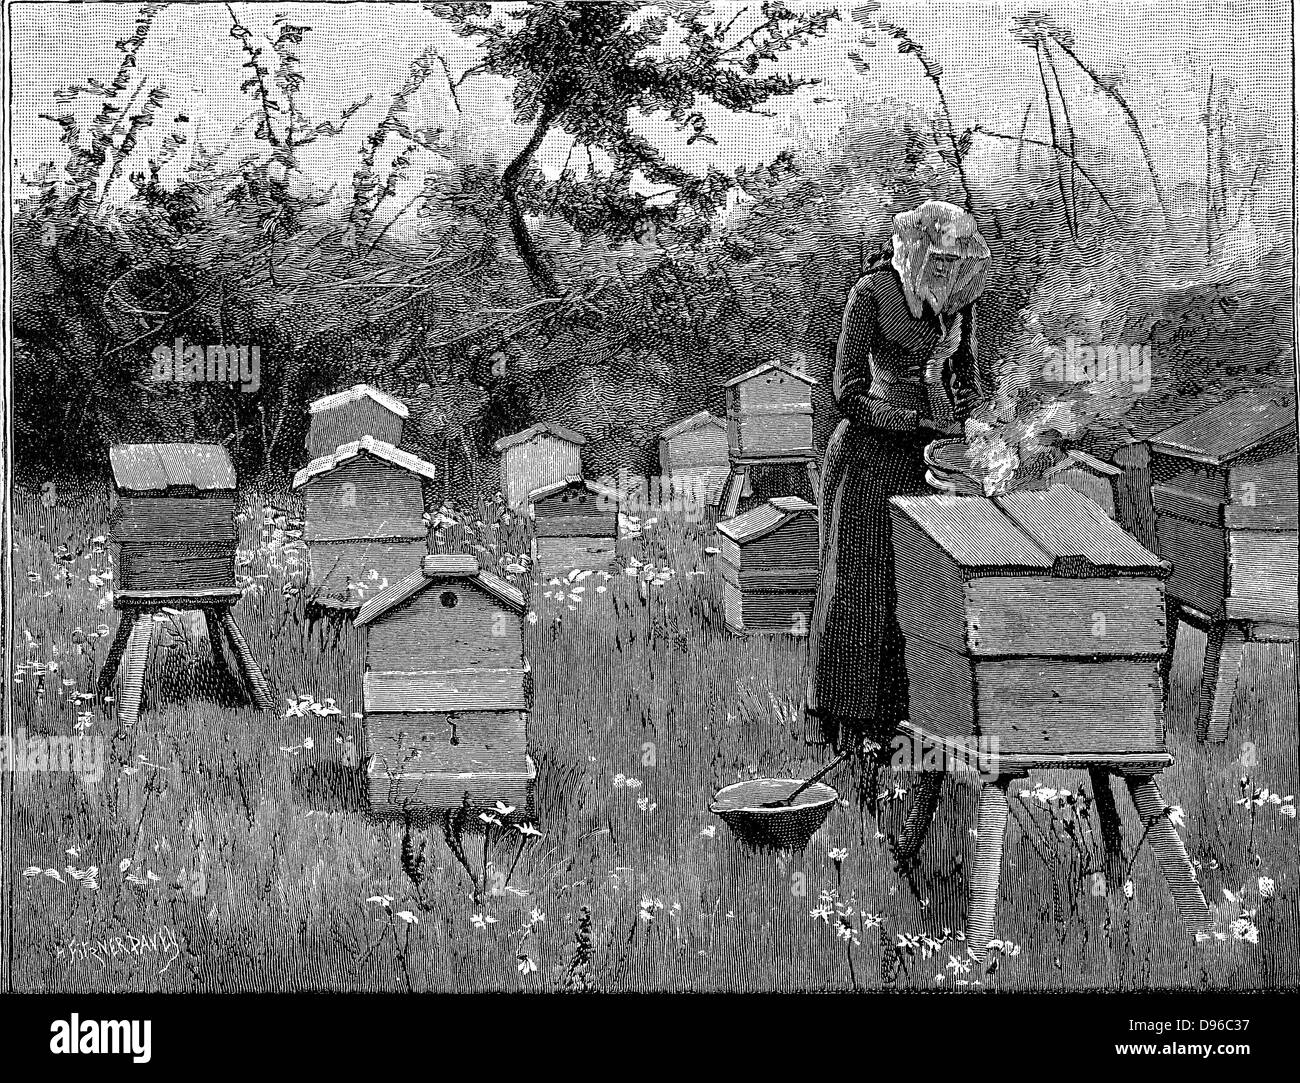 Apiary of wooden hives, Lismore, Ireland.  Woman in protective veil using bellows to puff smoke into hive to render bees less aggressive before opening the hive. Engraving from 'The English Illustrated Magazine', London, 1890 Stock Photo